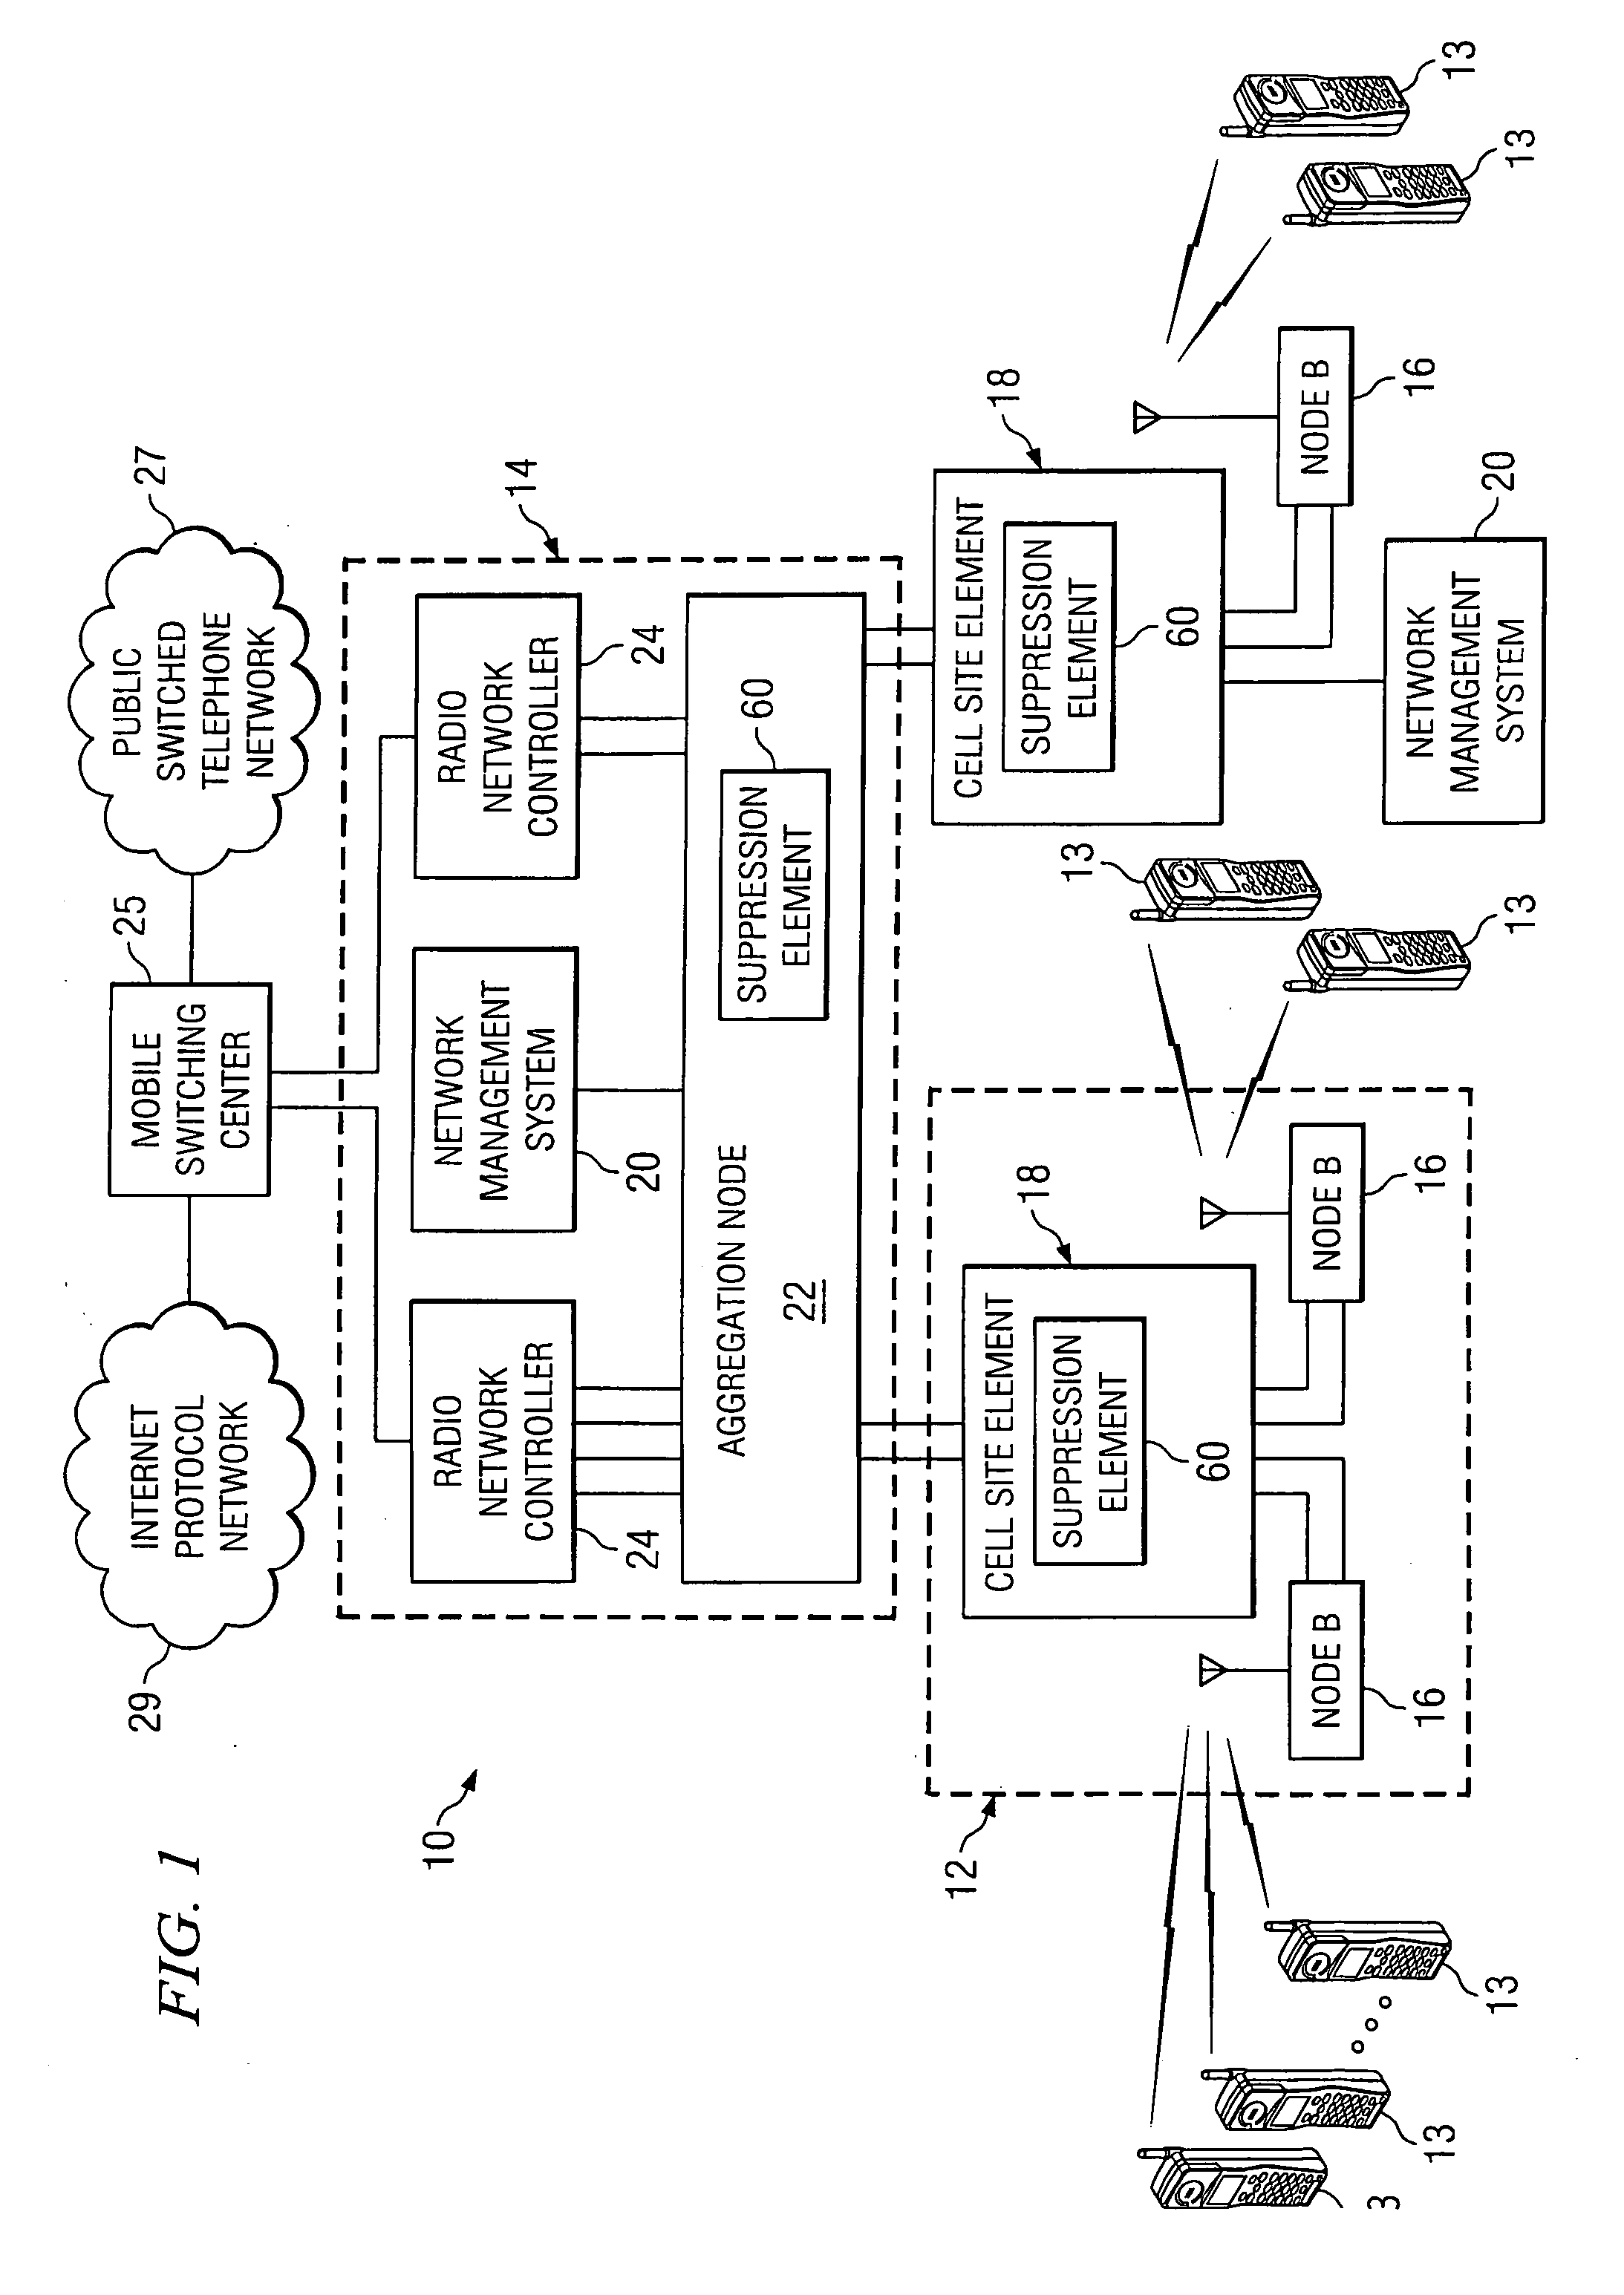 System and method for implementing suppression for asynchronous transfer mode (ATM) adaptation layer 5 (AAL5) traffic in a communications environment